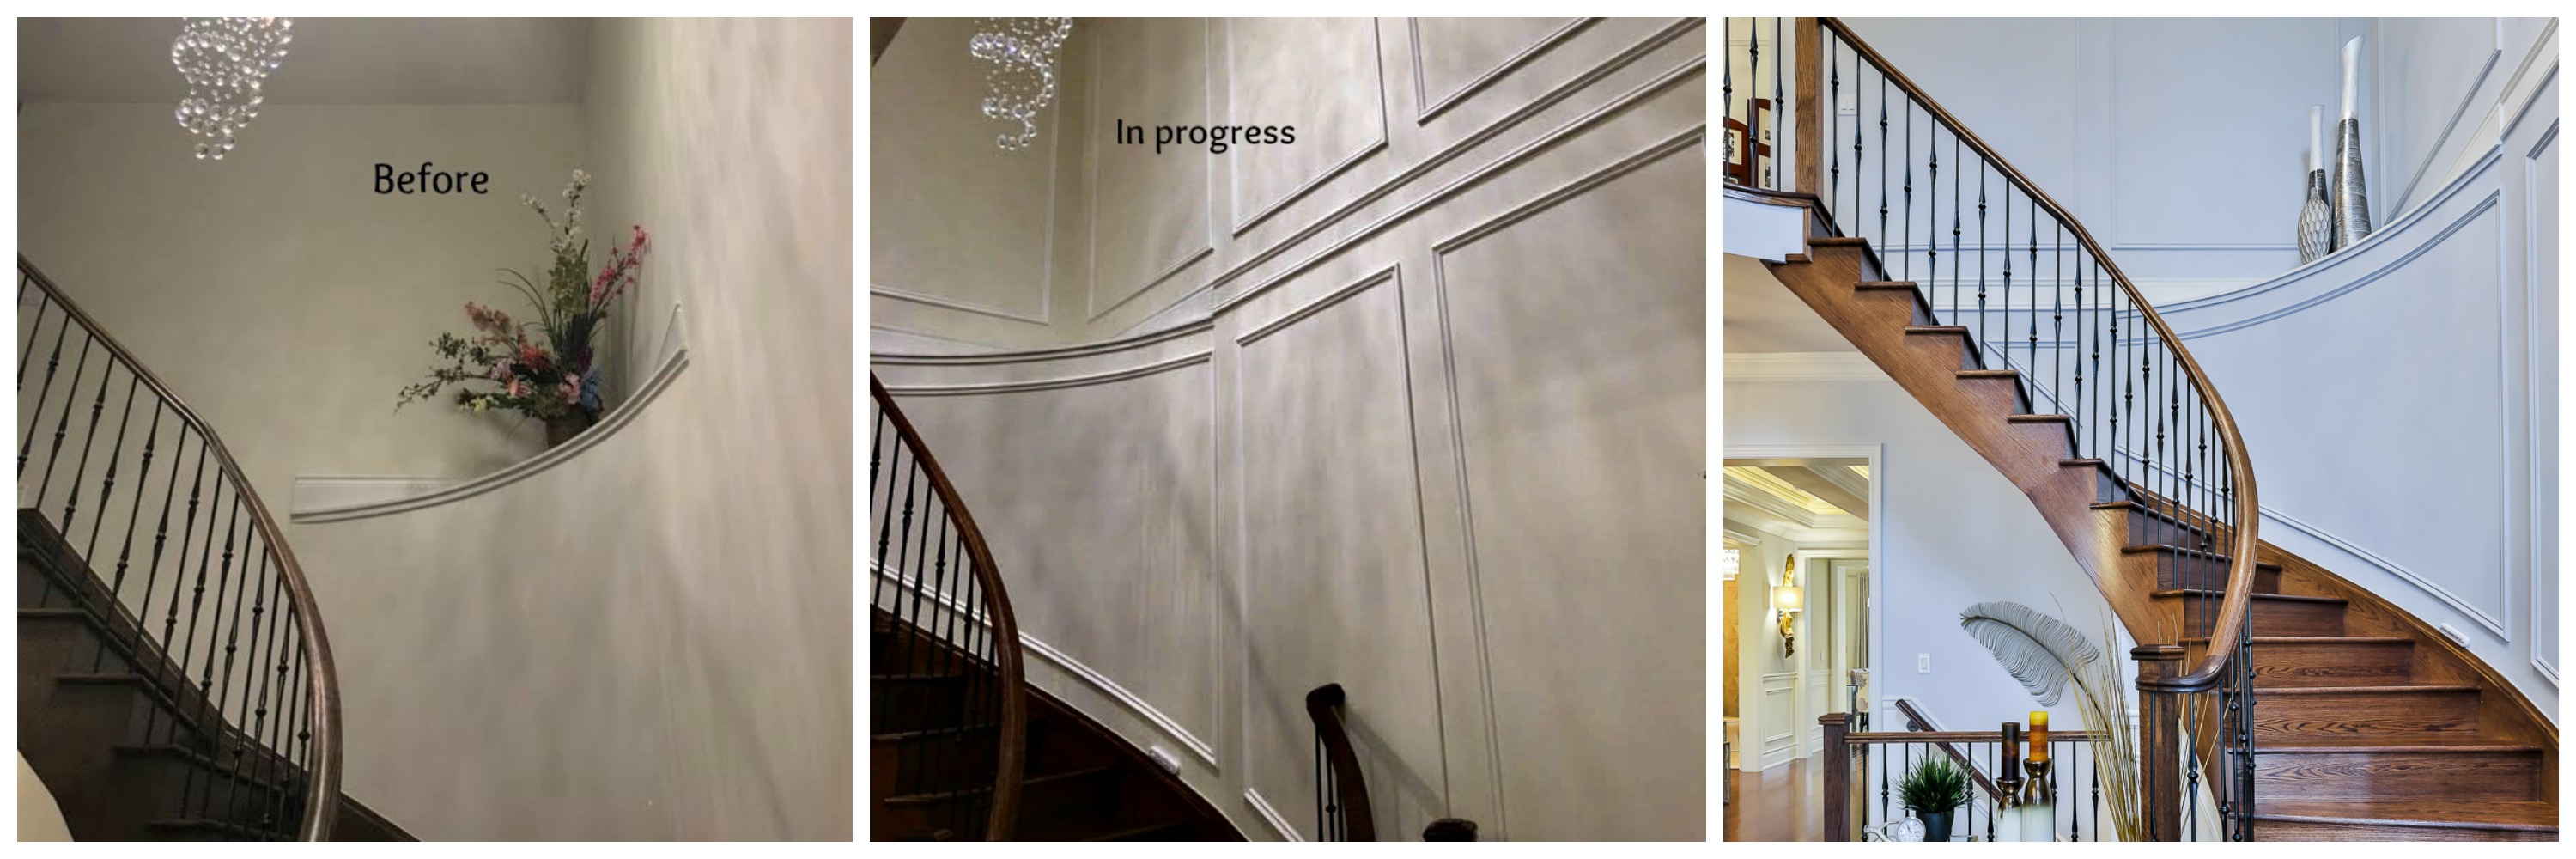 Staircase wall work